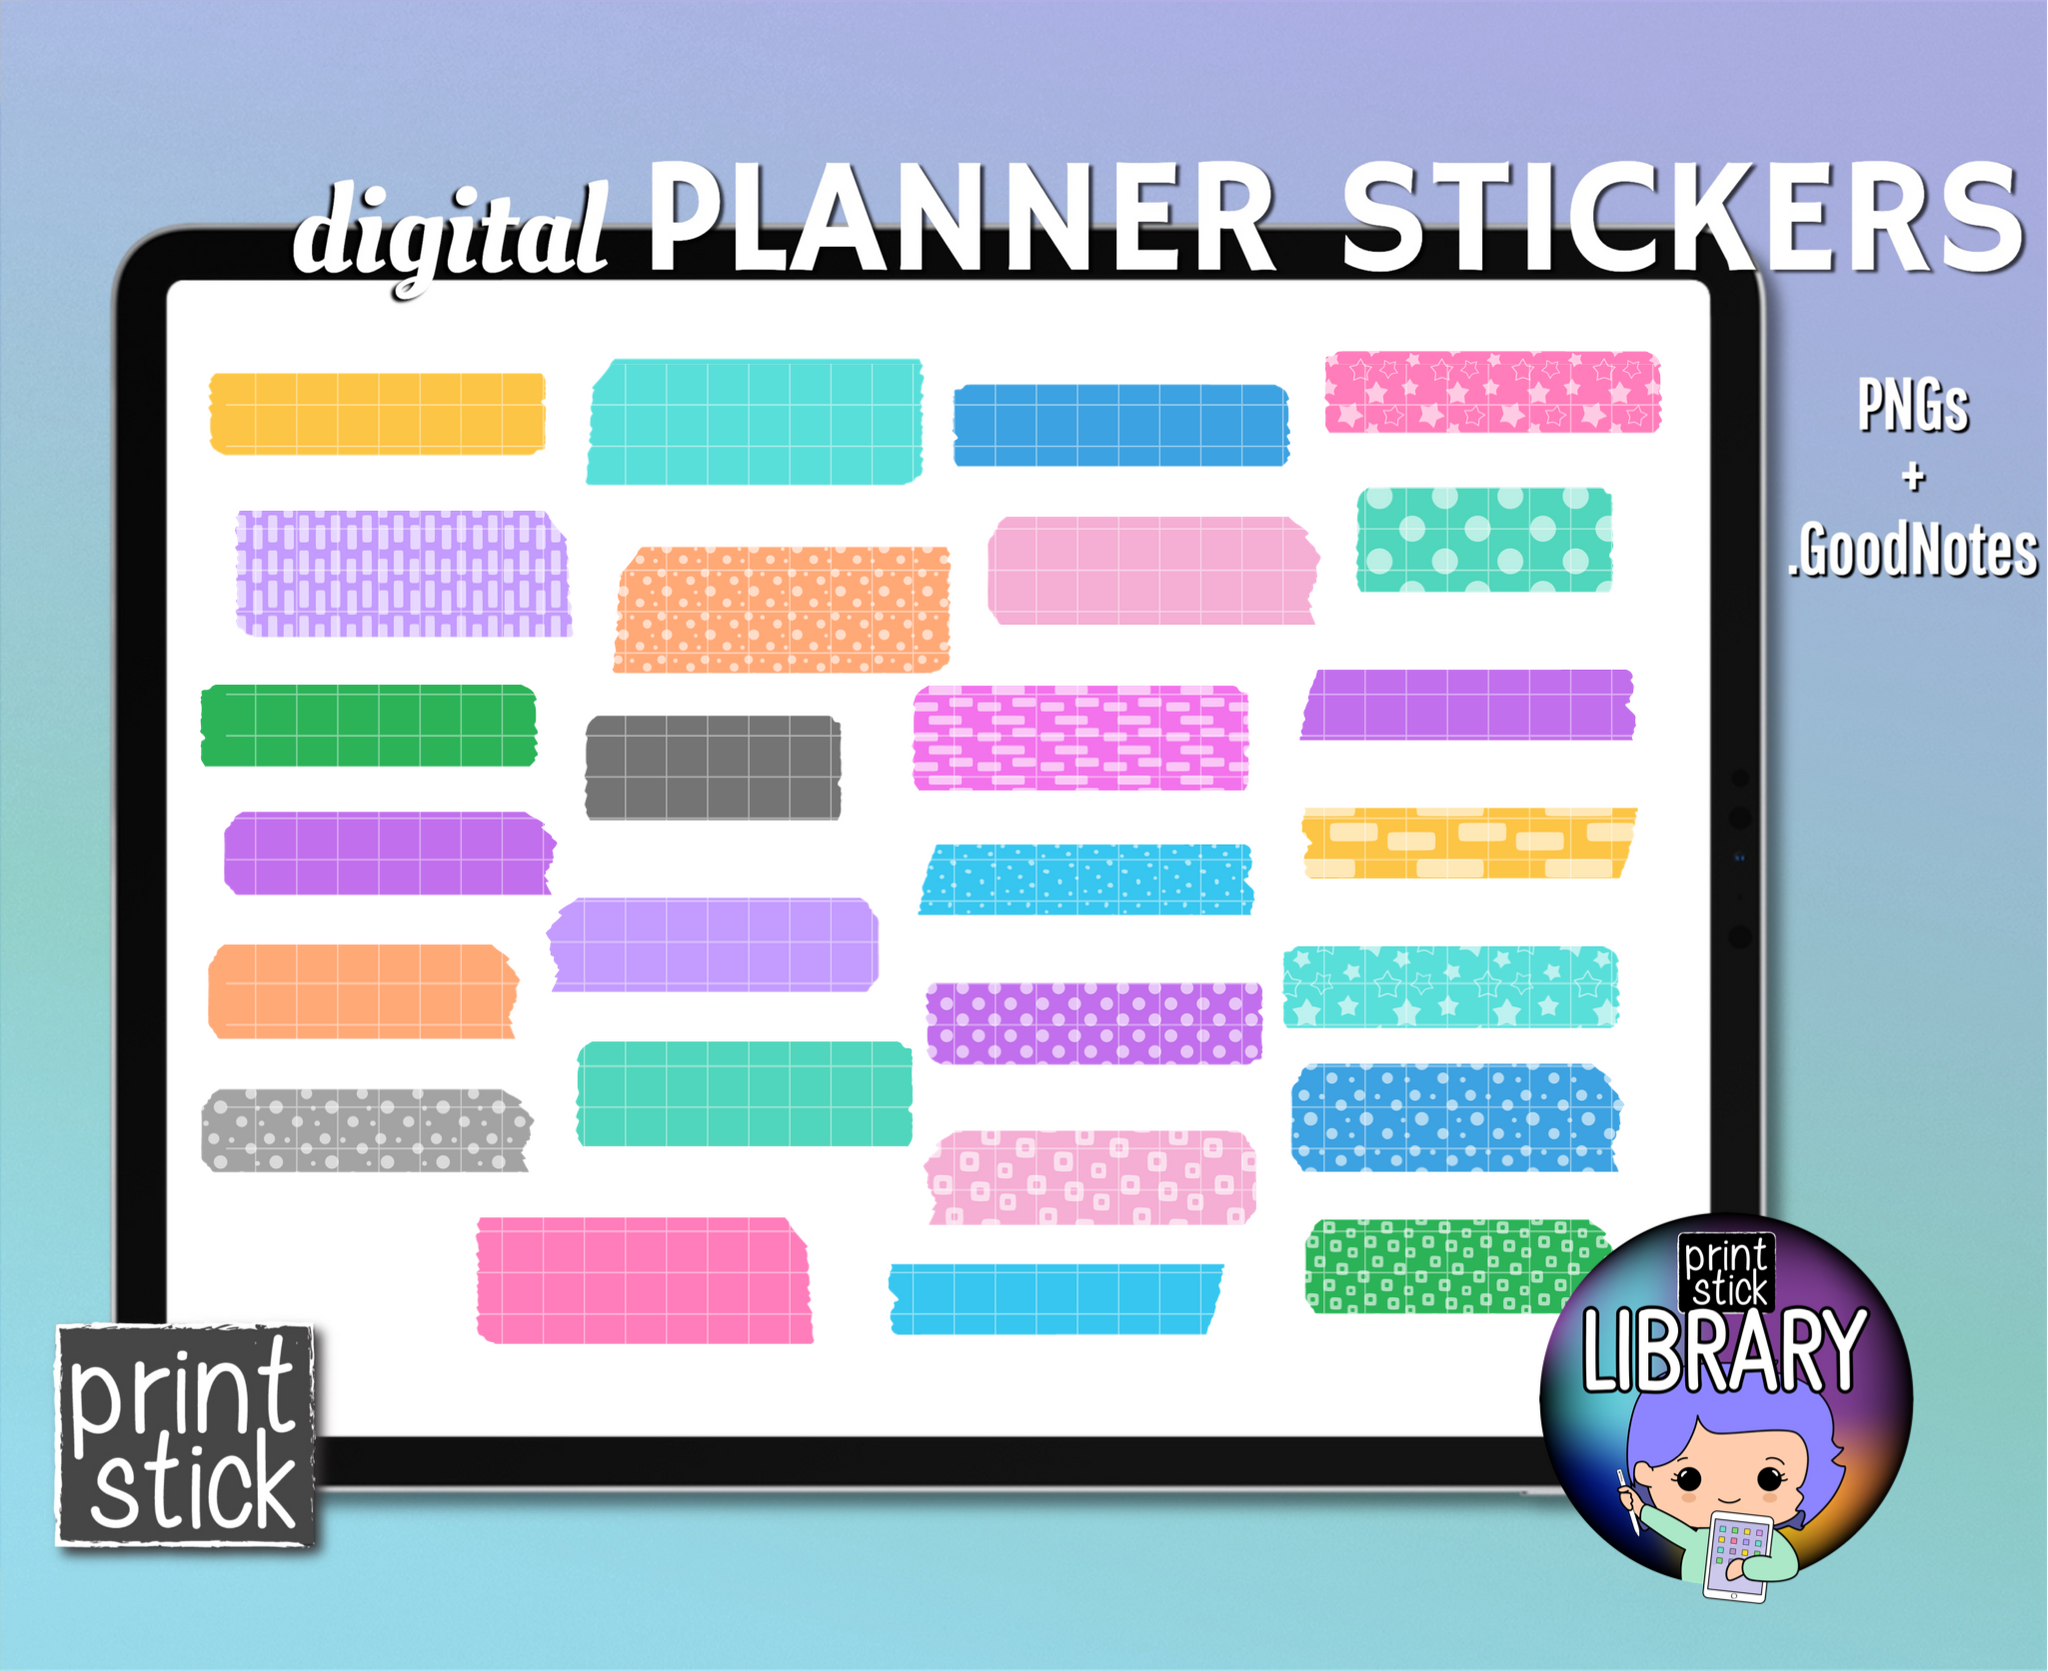 SS Washi Colorful 1 Digital Planner Stickers - Print Stick